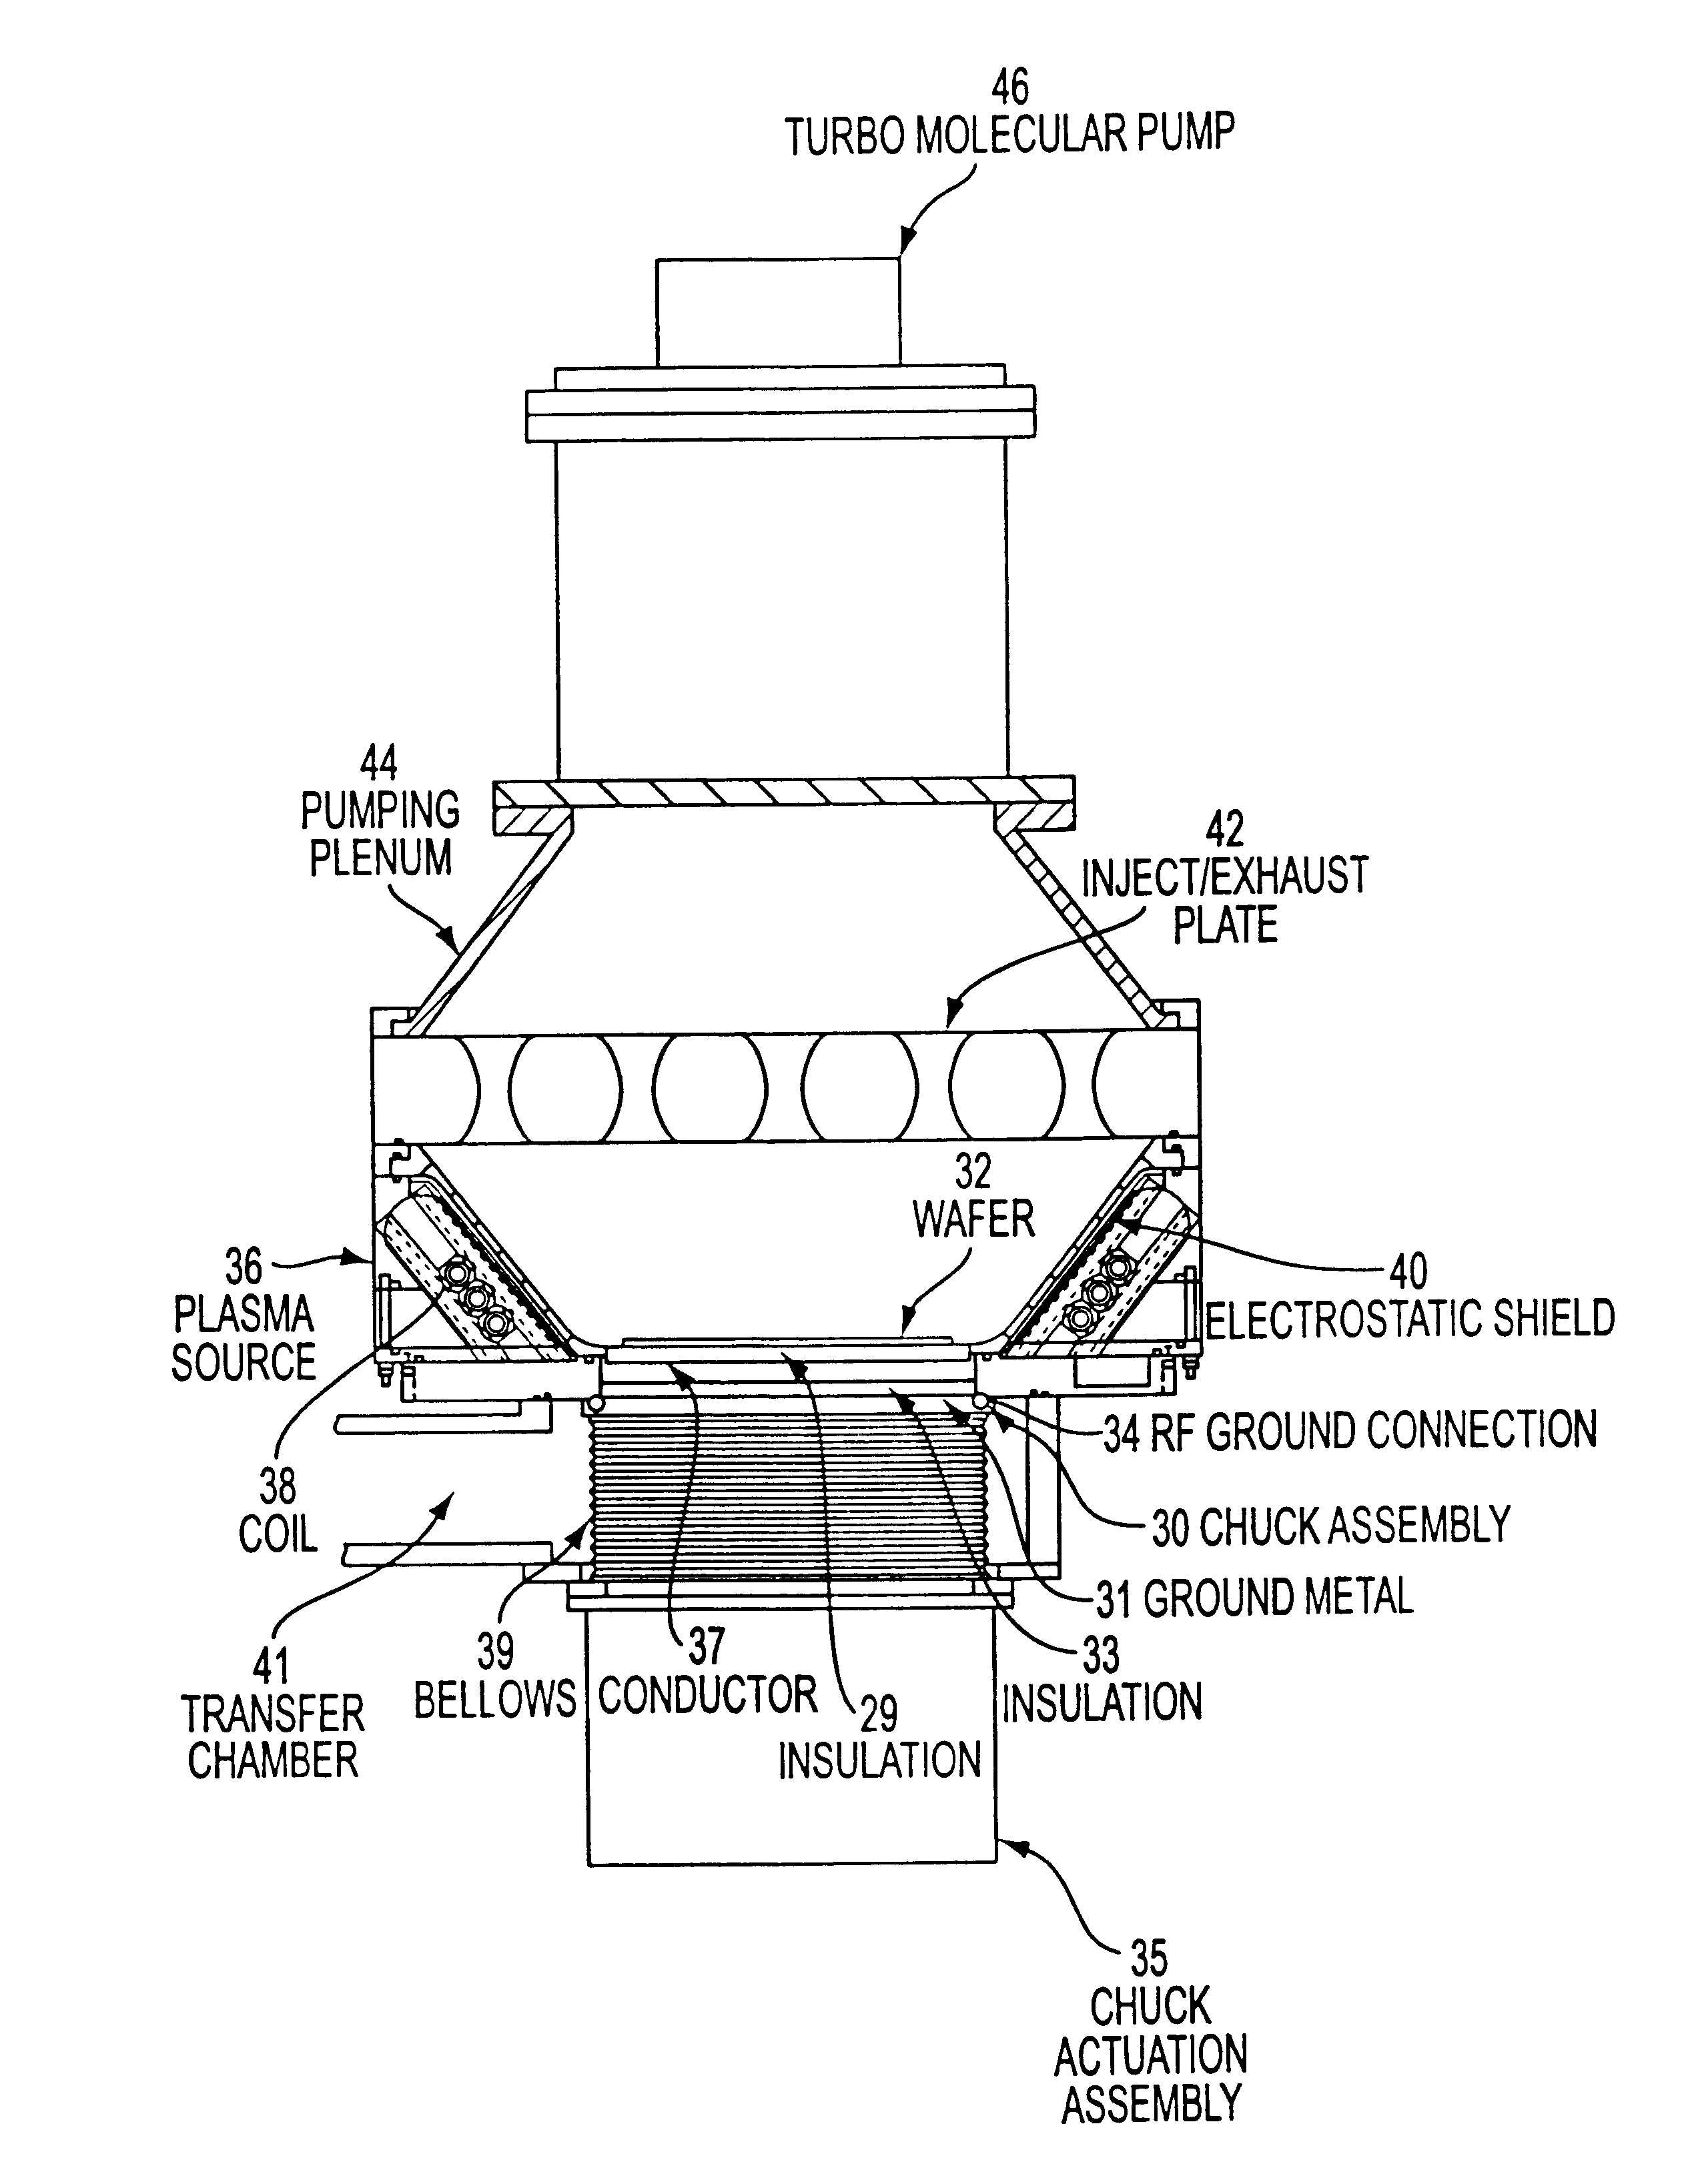 Reduced impedance chamber